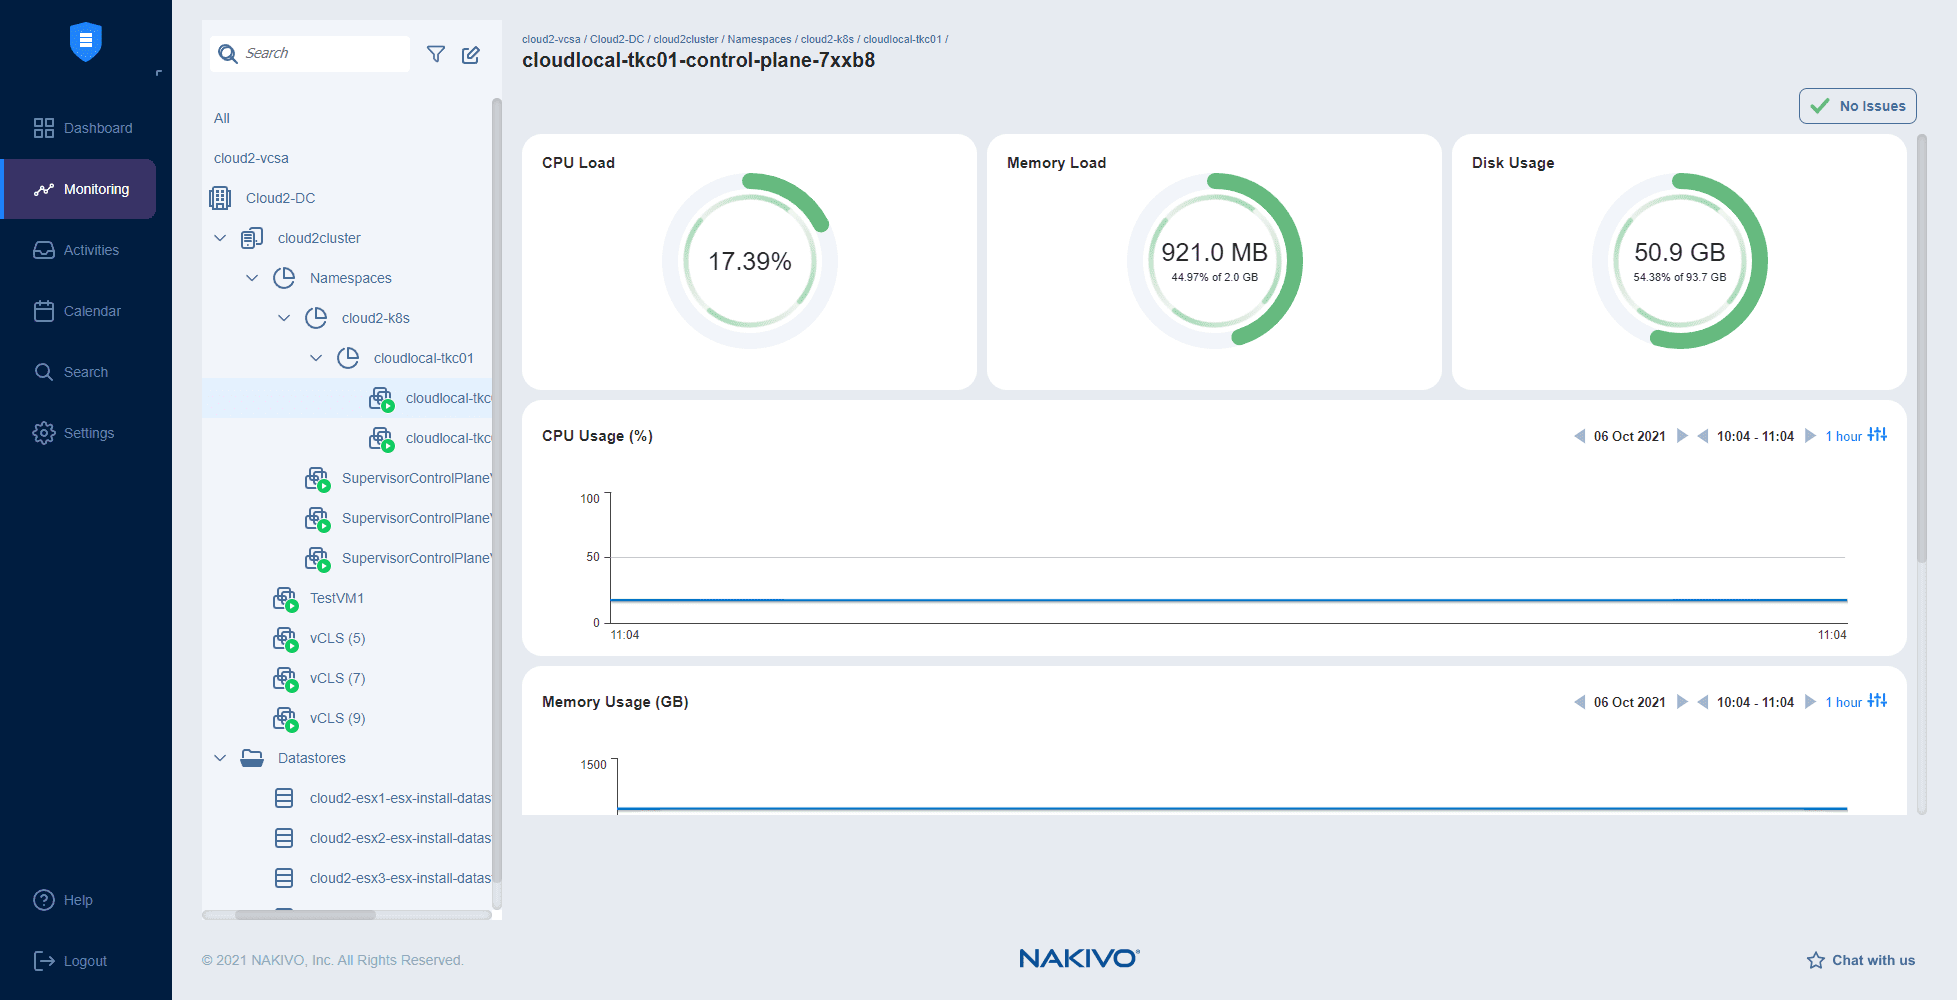 Viewing the performance statics of VMs in the VMware environment using NAKIVO monitoring